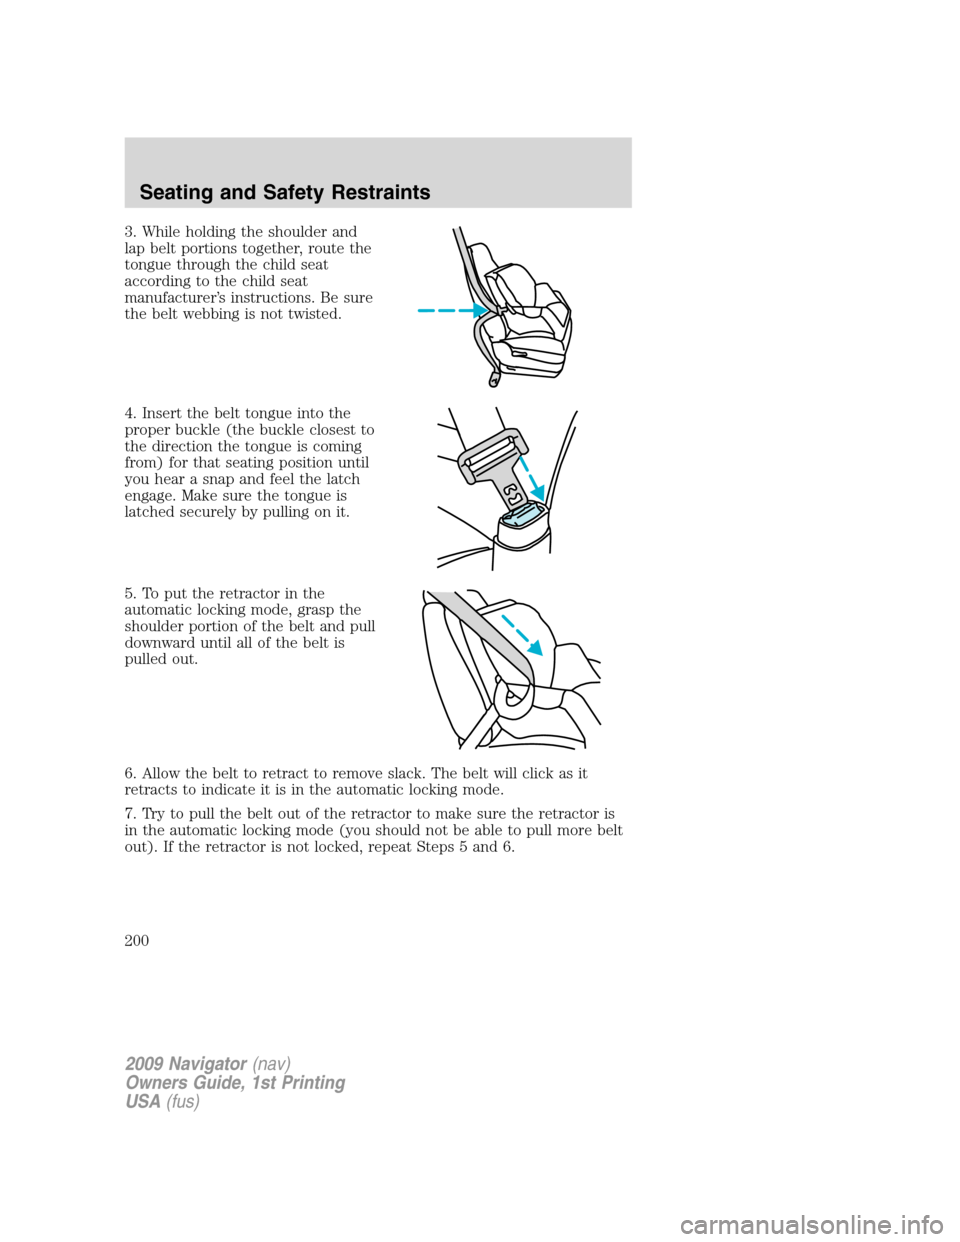 LINCOLN NAVIGATOR 2009  Owners Manual 3. While holding the shoulder and
lap belt portions together, route the
tongue through the child seat
according to the child seat
manufacturer’s instructions. Be sure
the belt webbing is not twisted